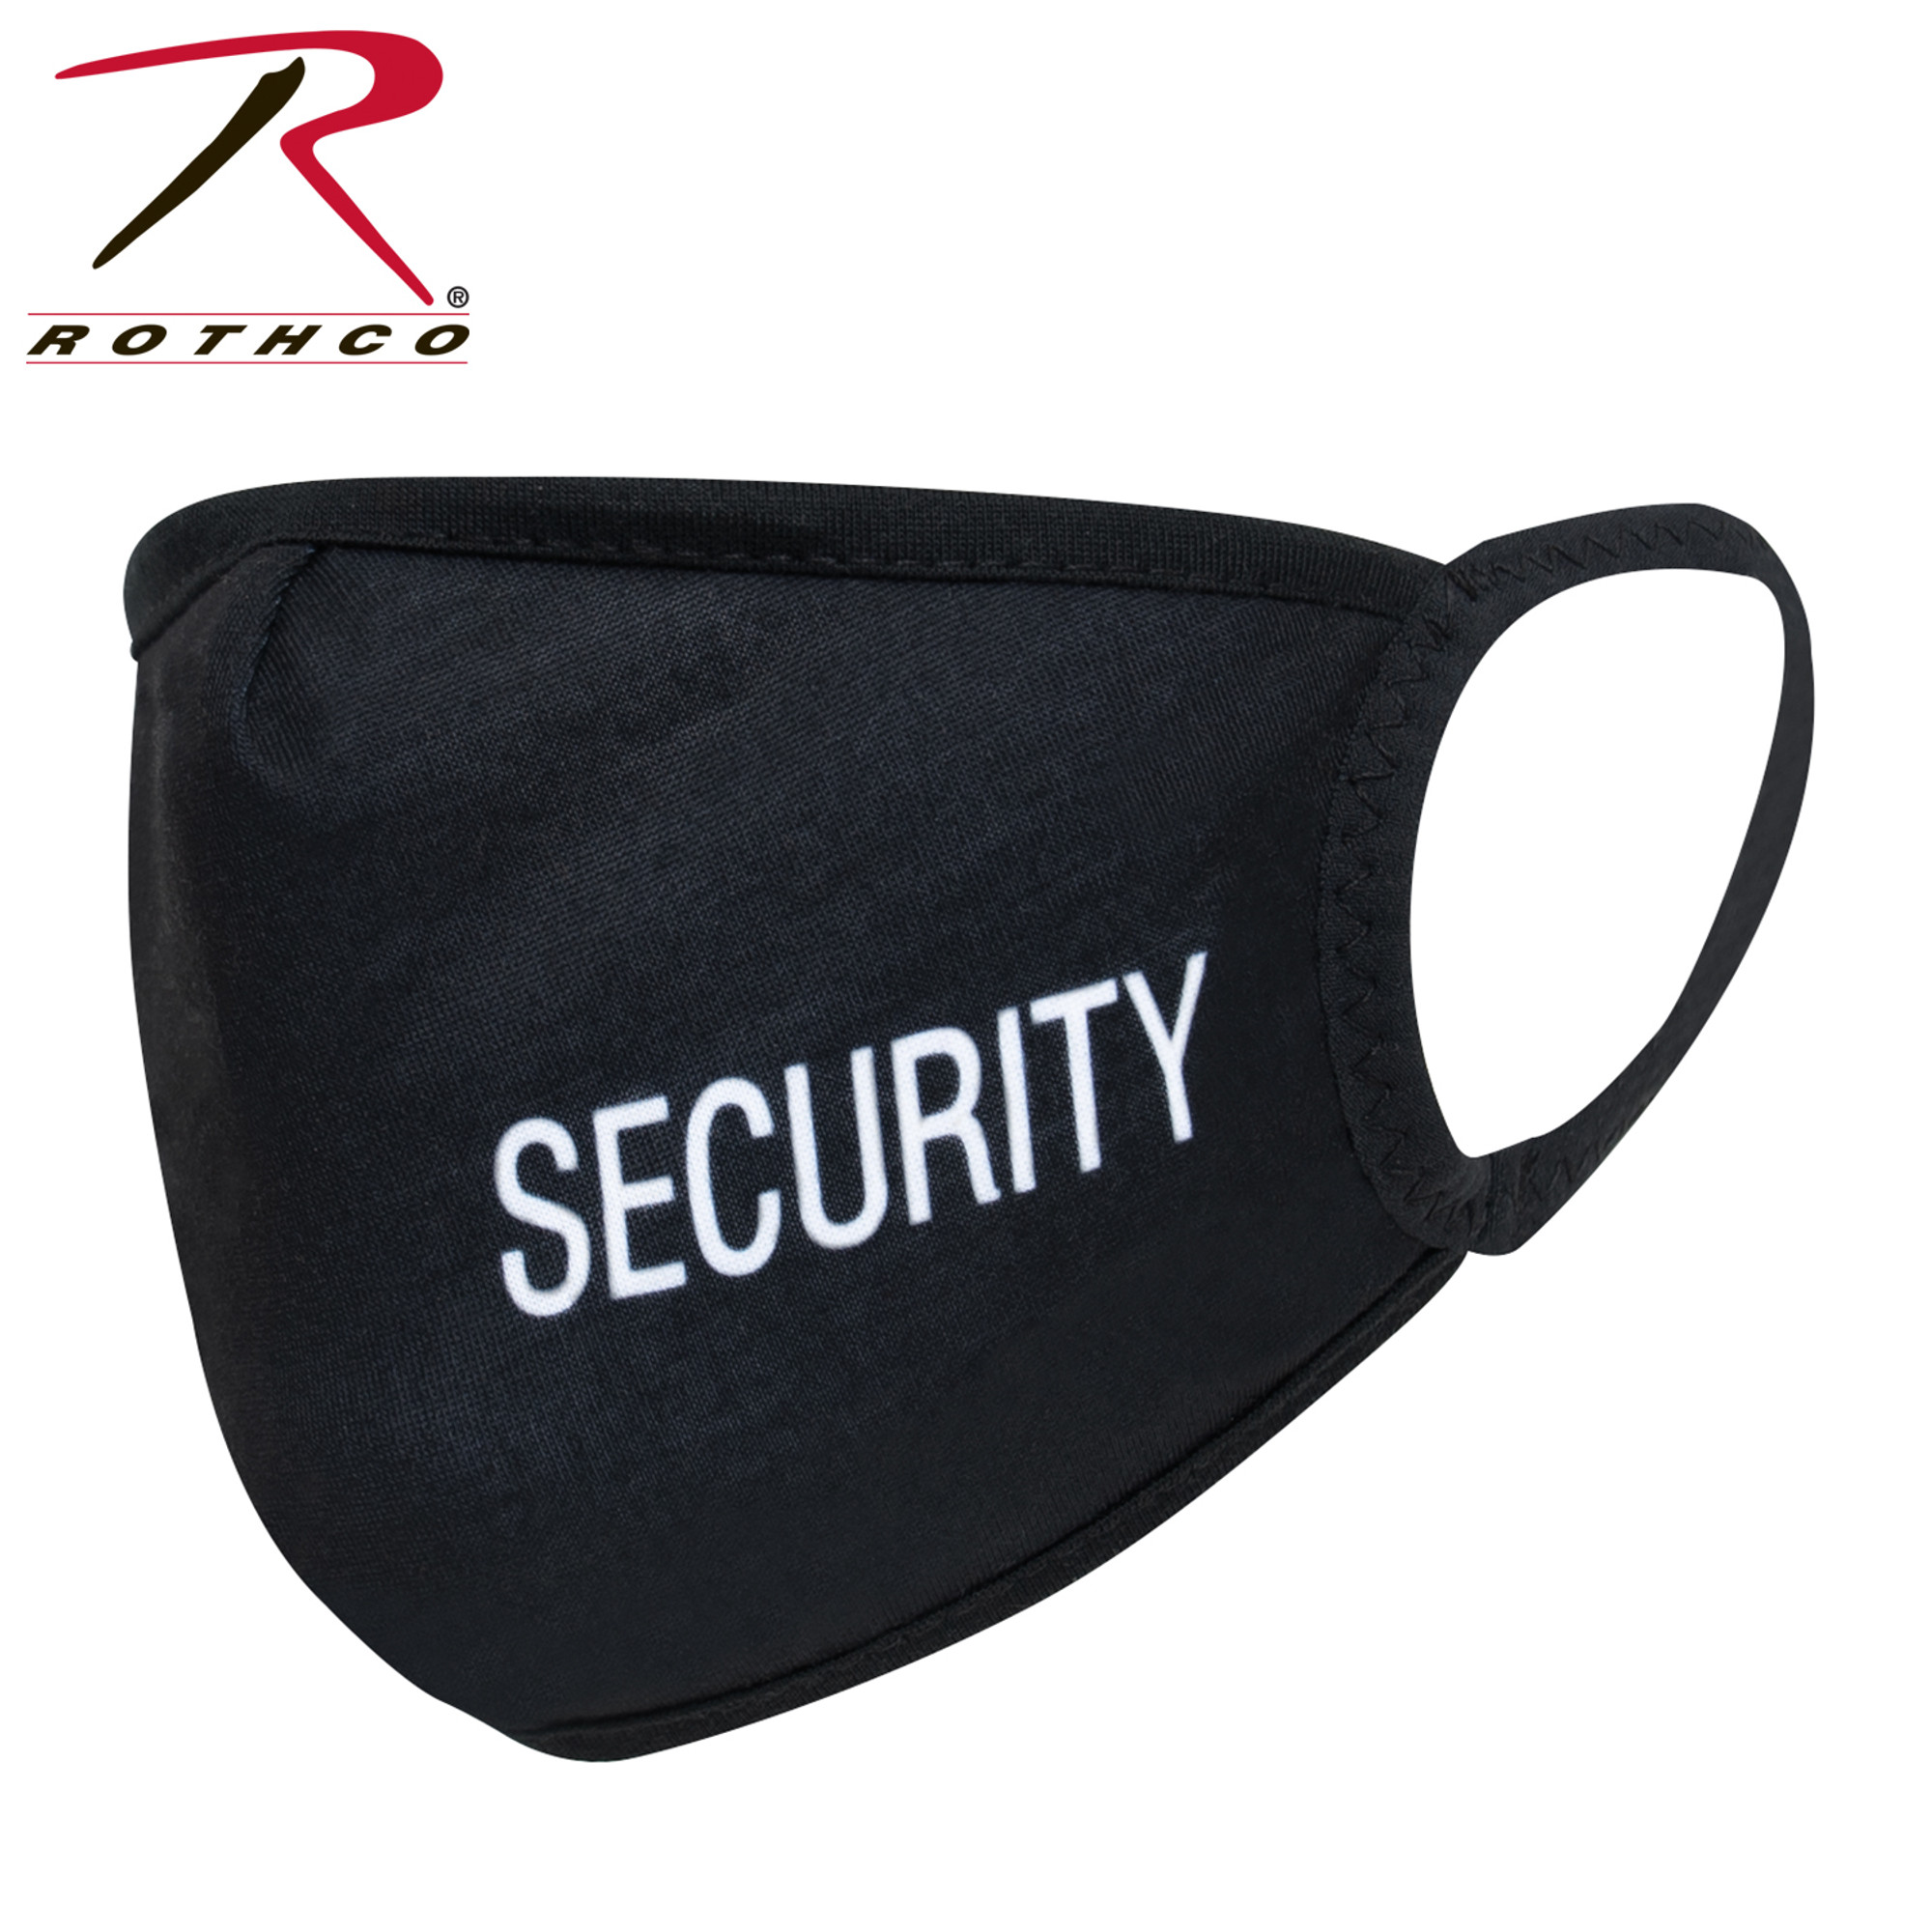 Rothco Reusable 3 Layer Facemask w/Security Print